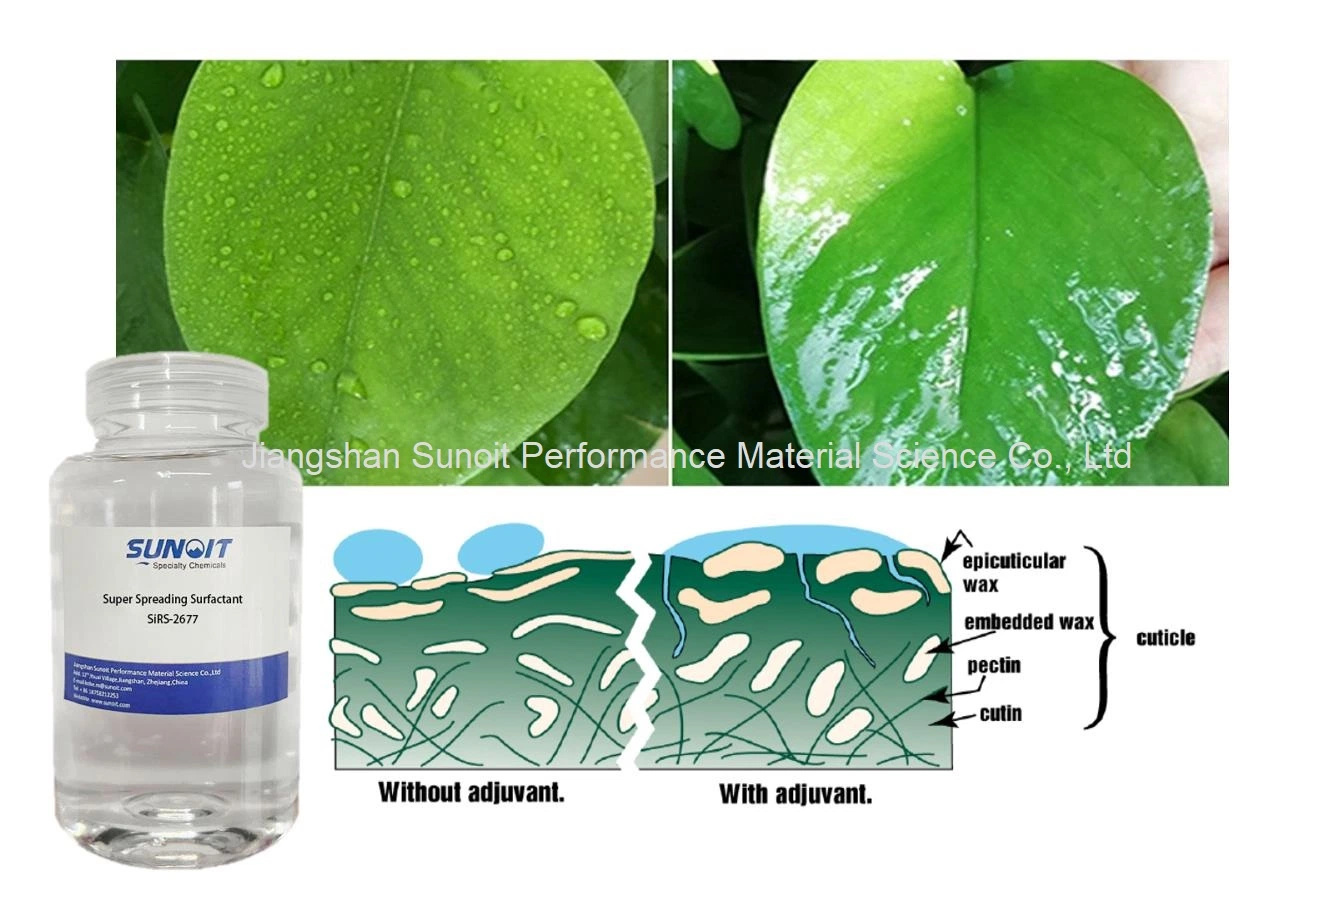 Super Spreading and Penatration Silicone Adjuvant for Agricultural Chemicals